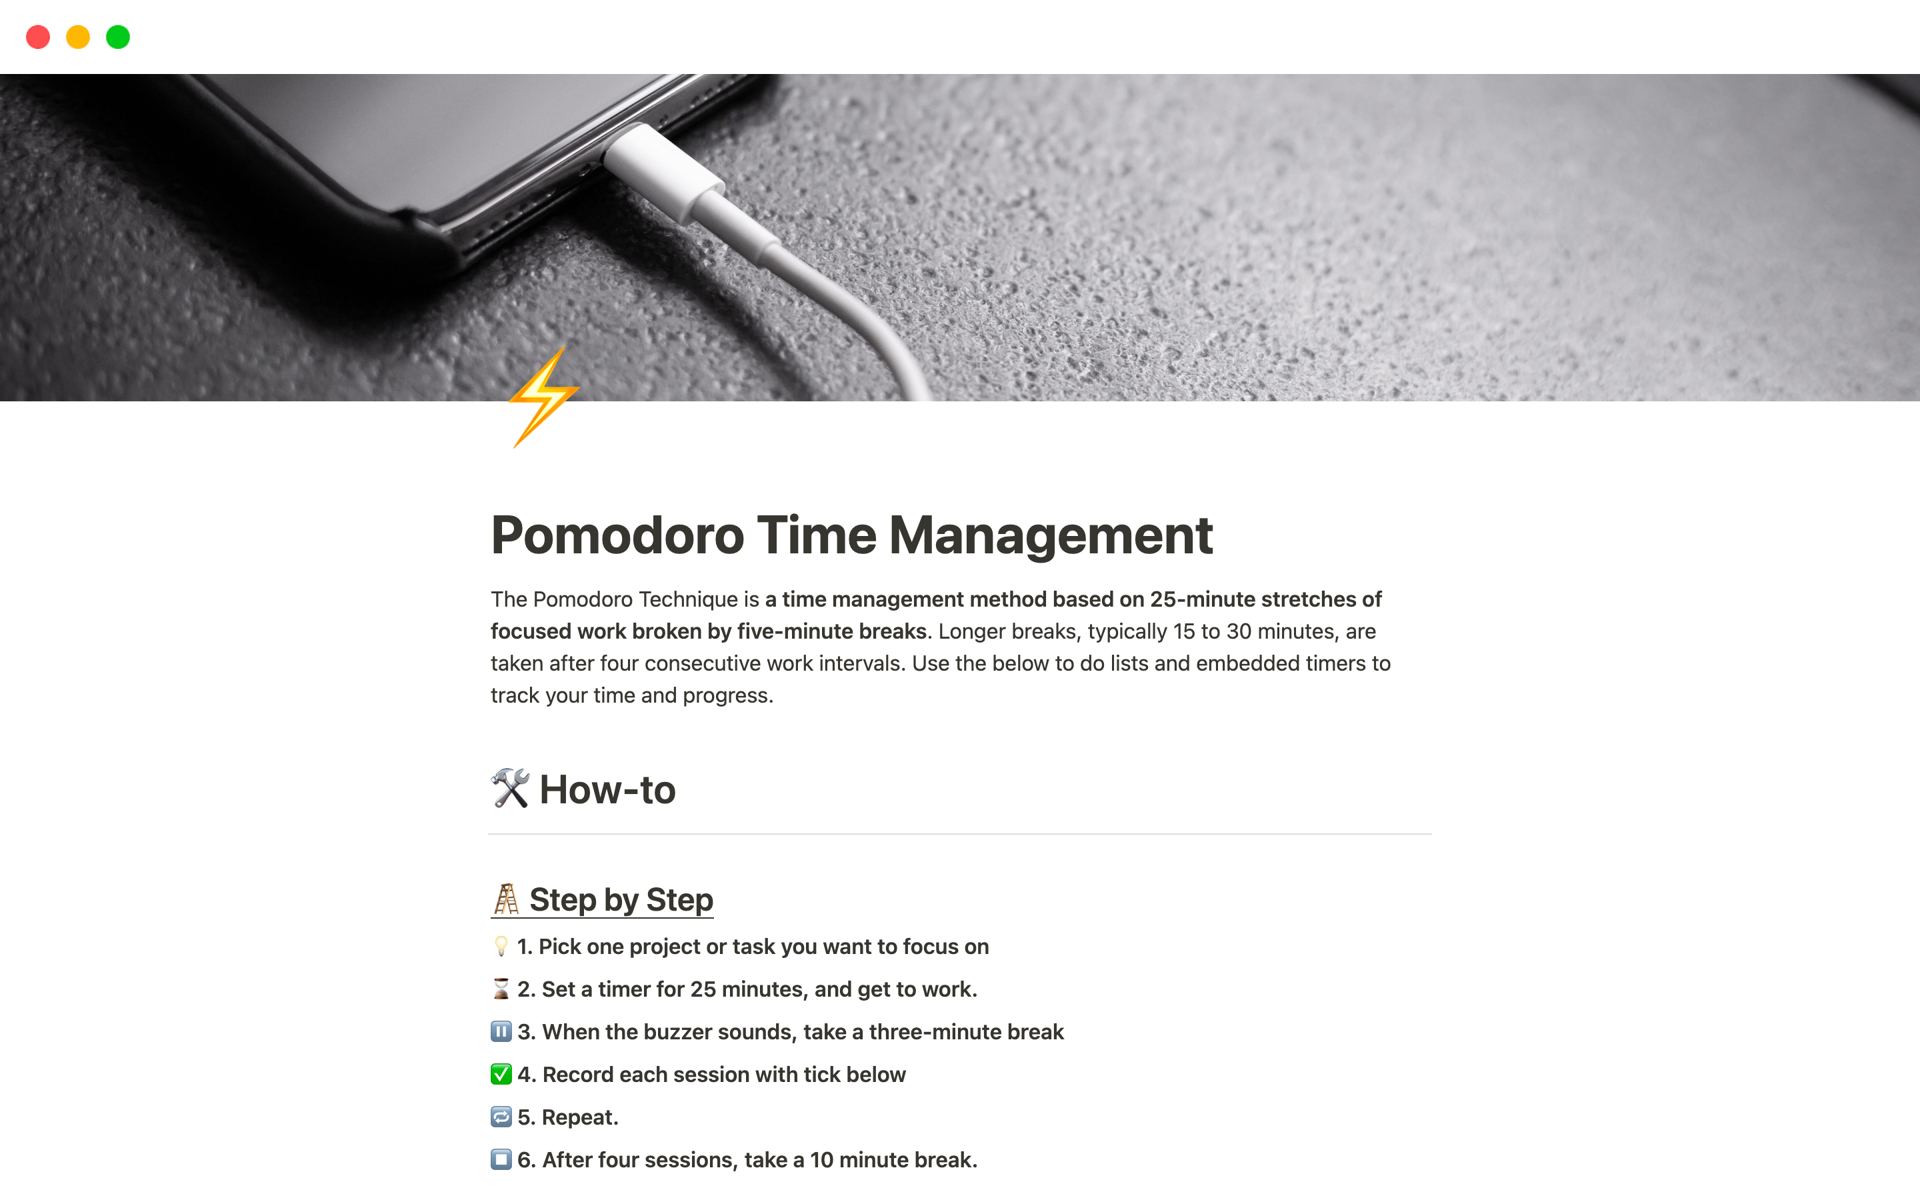 Systematize the Pomodoro Time management technique with embedded lists and timers.